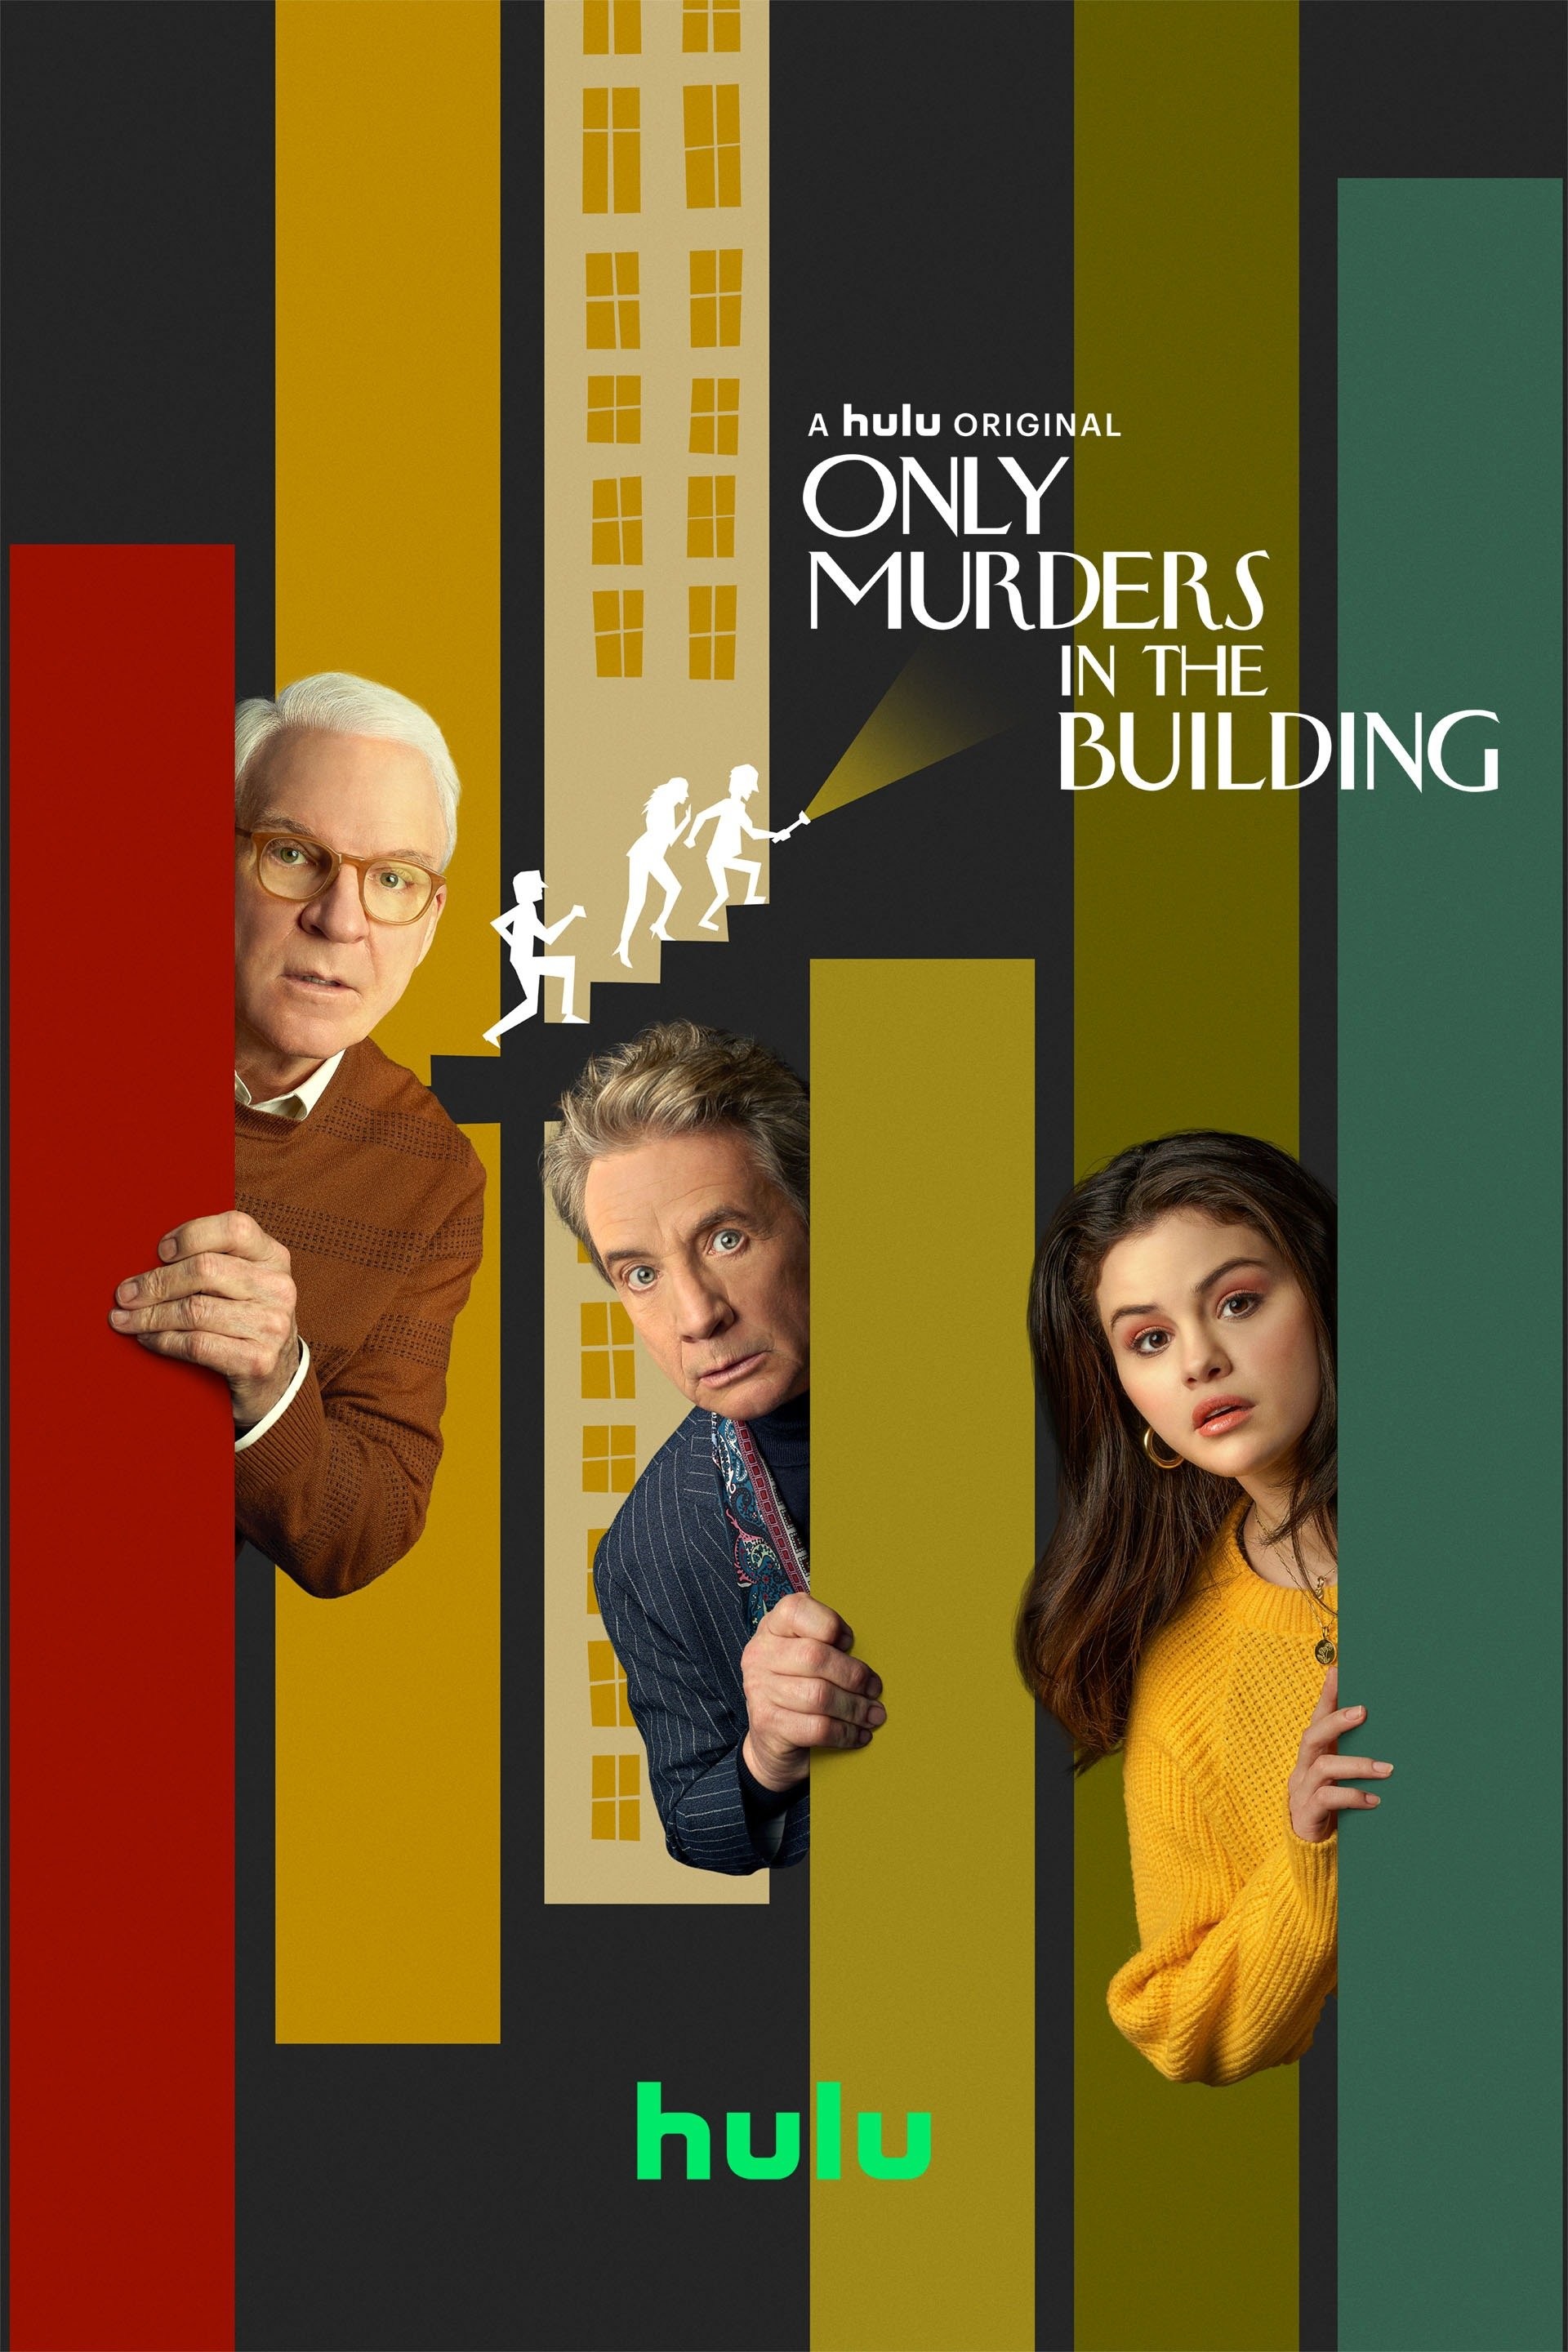 Only 1 the Season in Tomatoes Rotten Murders | Building